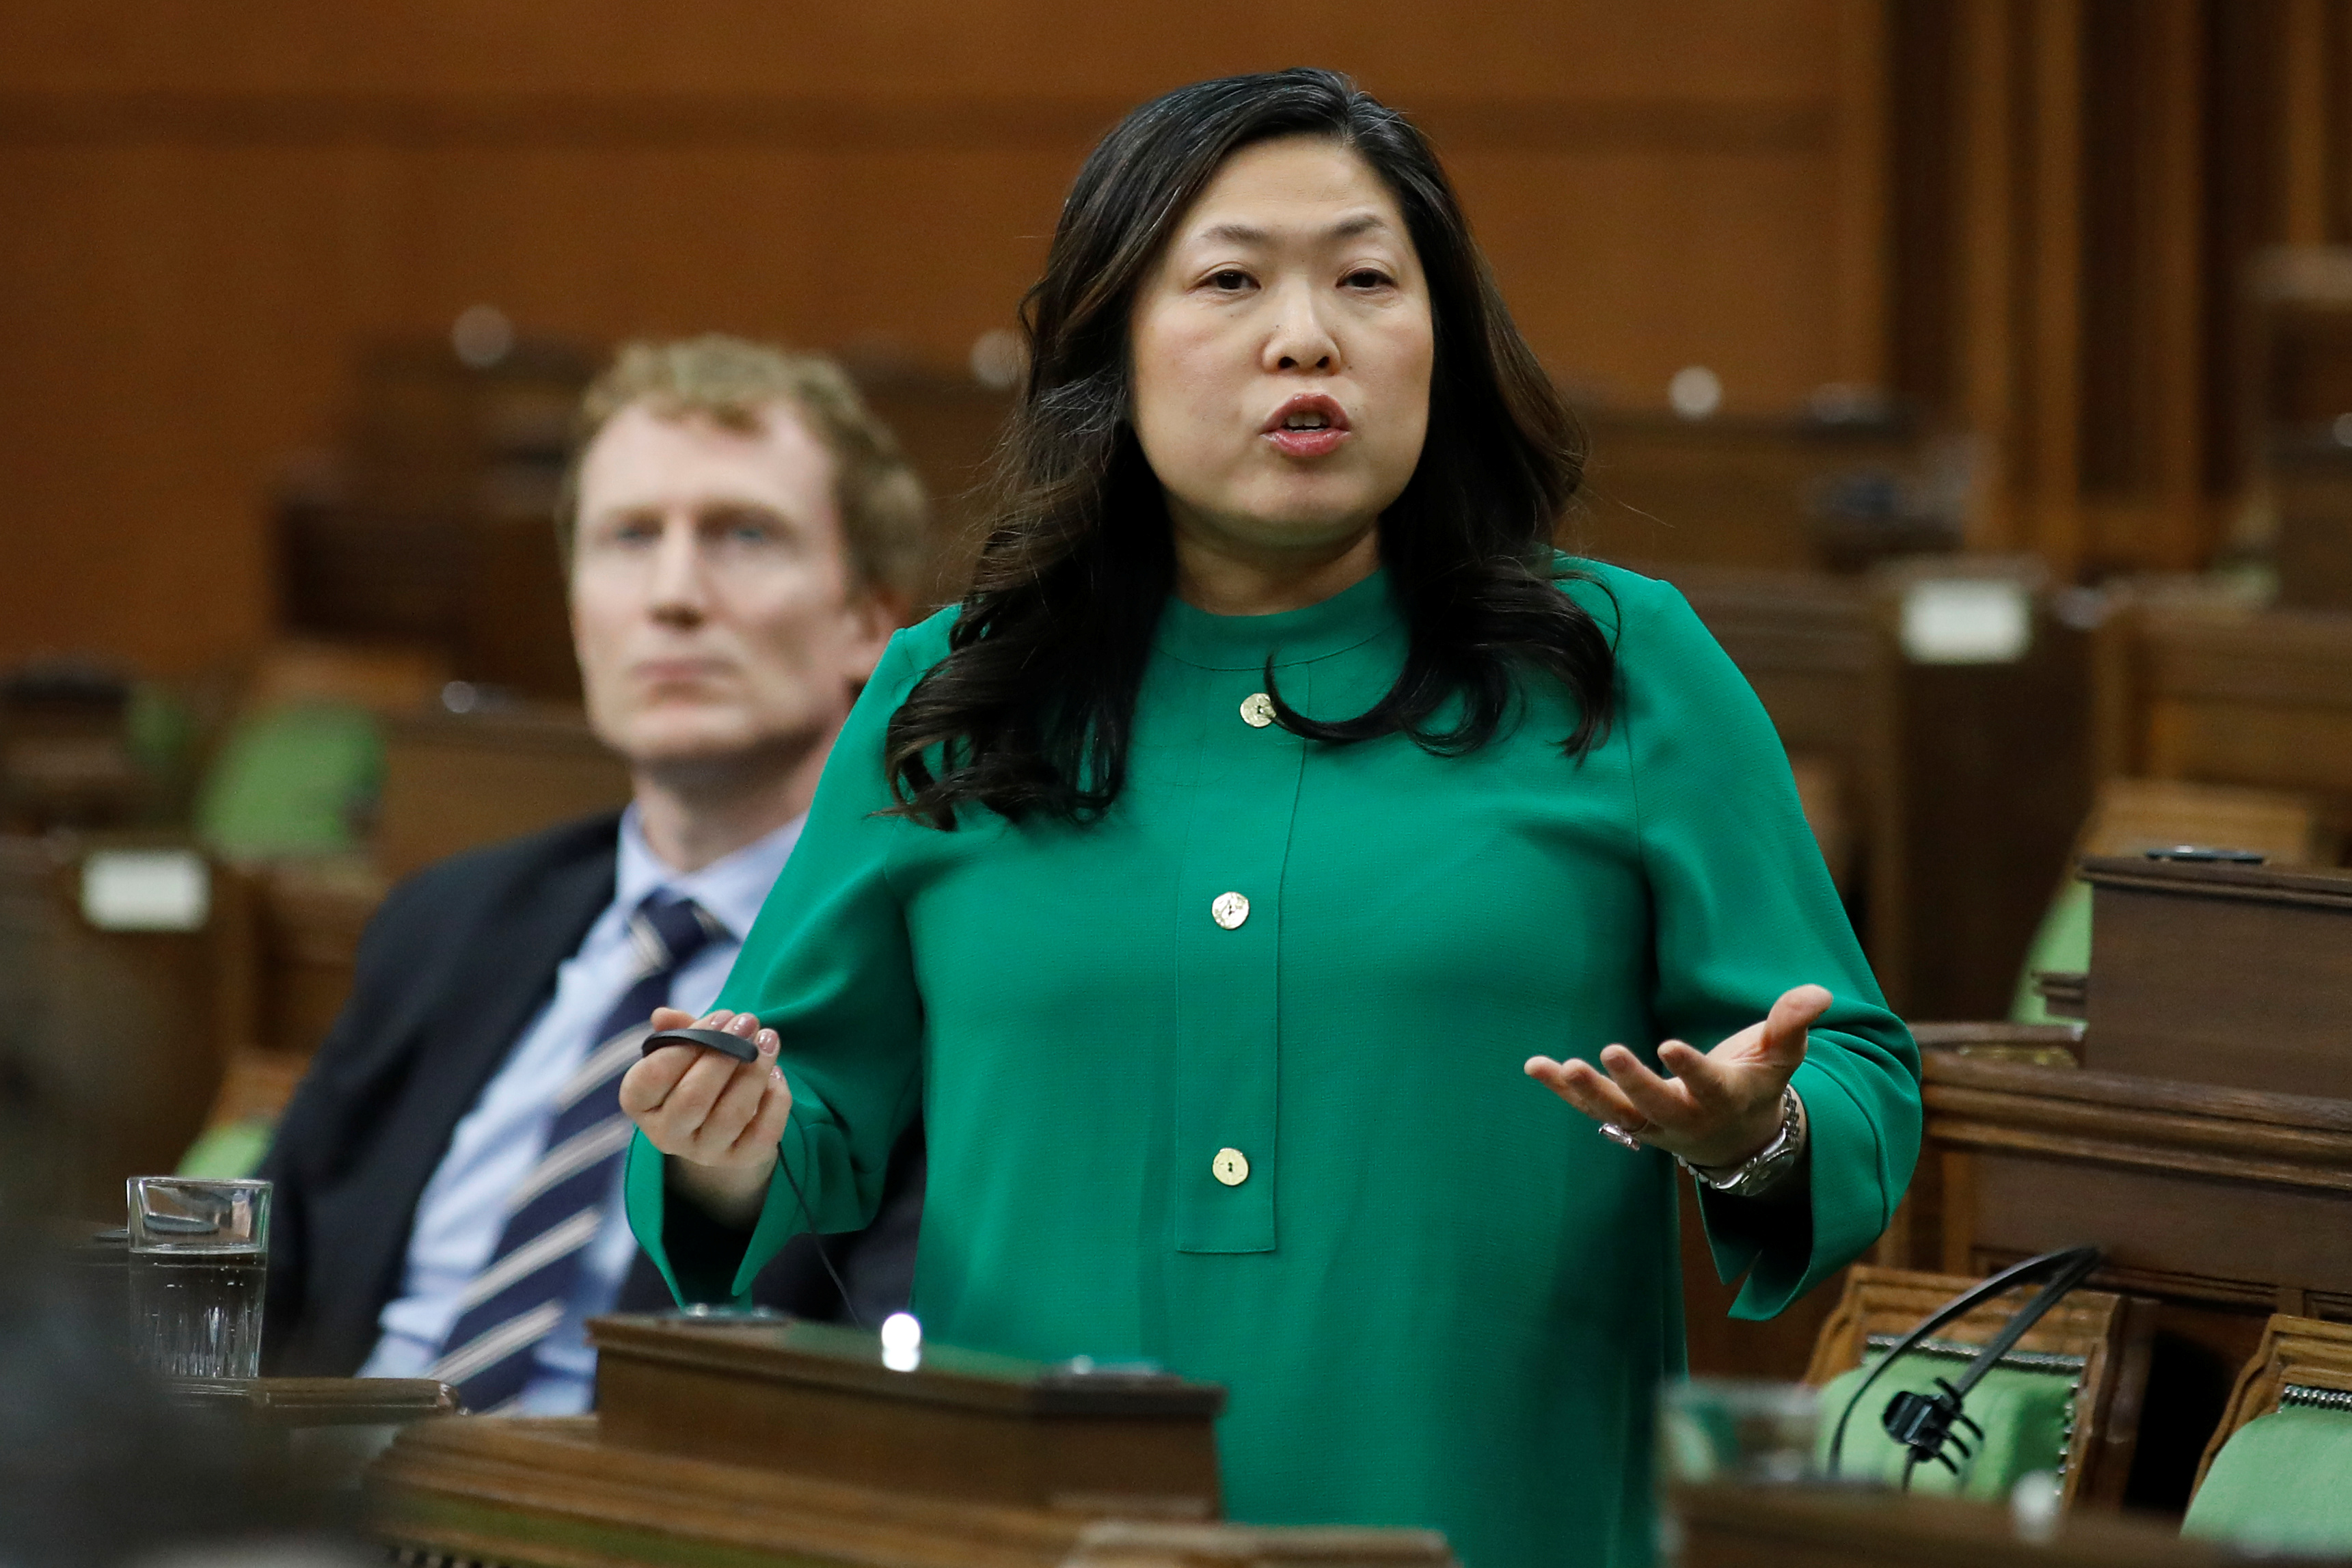 Canada's Minister of Small Business, Export Promotion and International Trade Mary Ng speaks during Question Period in the House of Commons on Parliament Hill in Ottawa